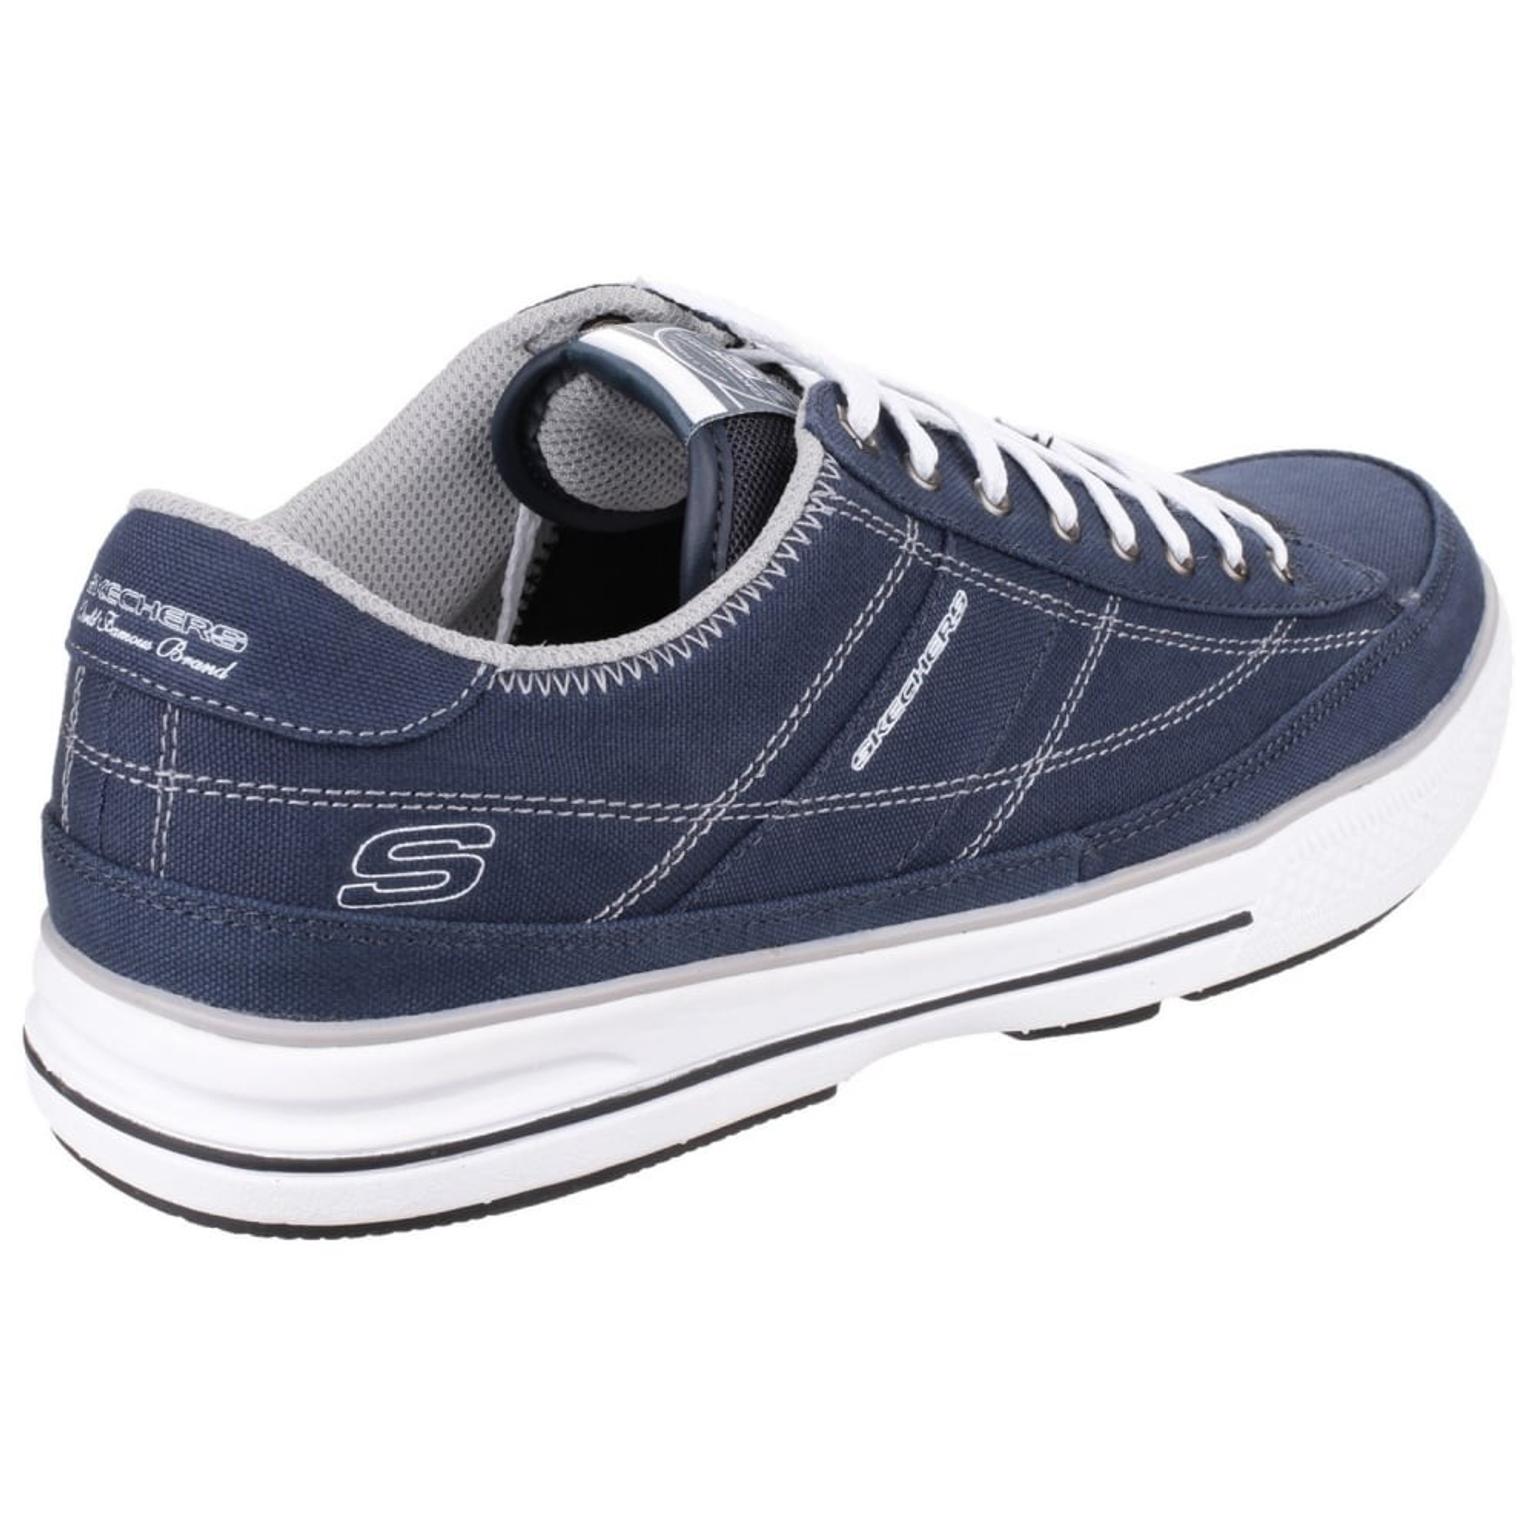 skechers arcade chat charcoal